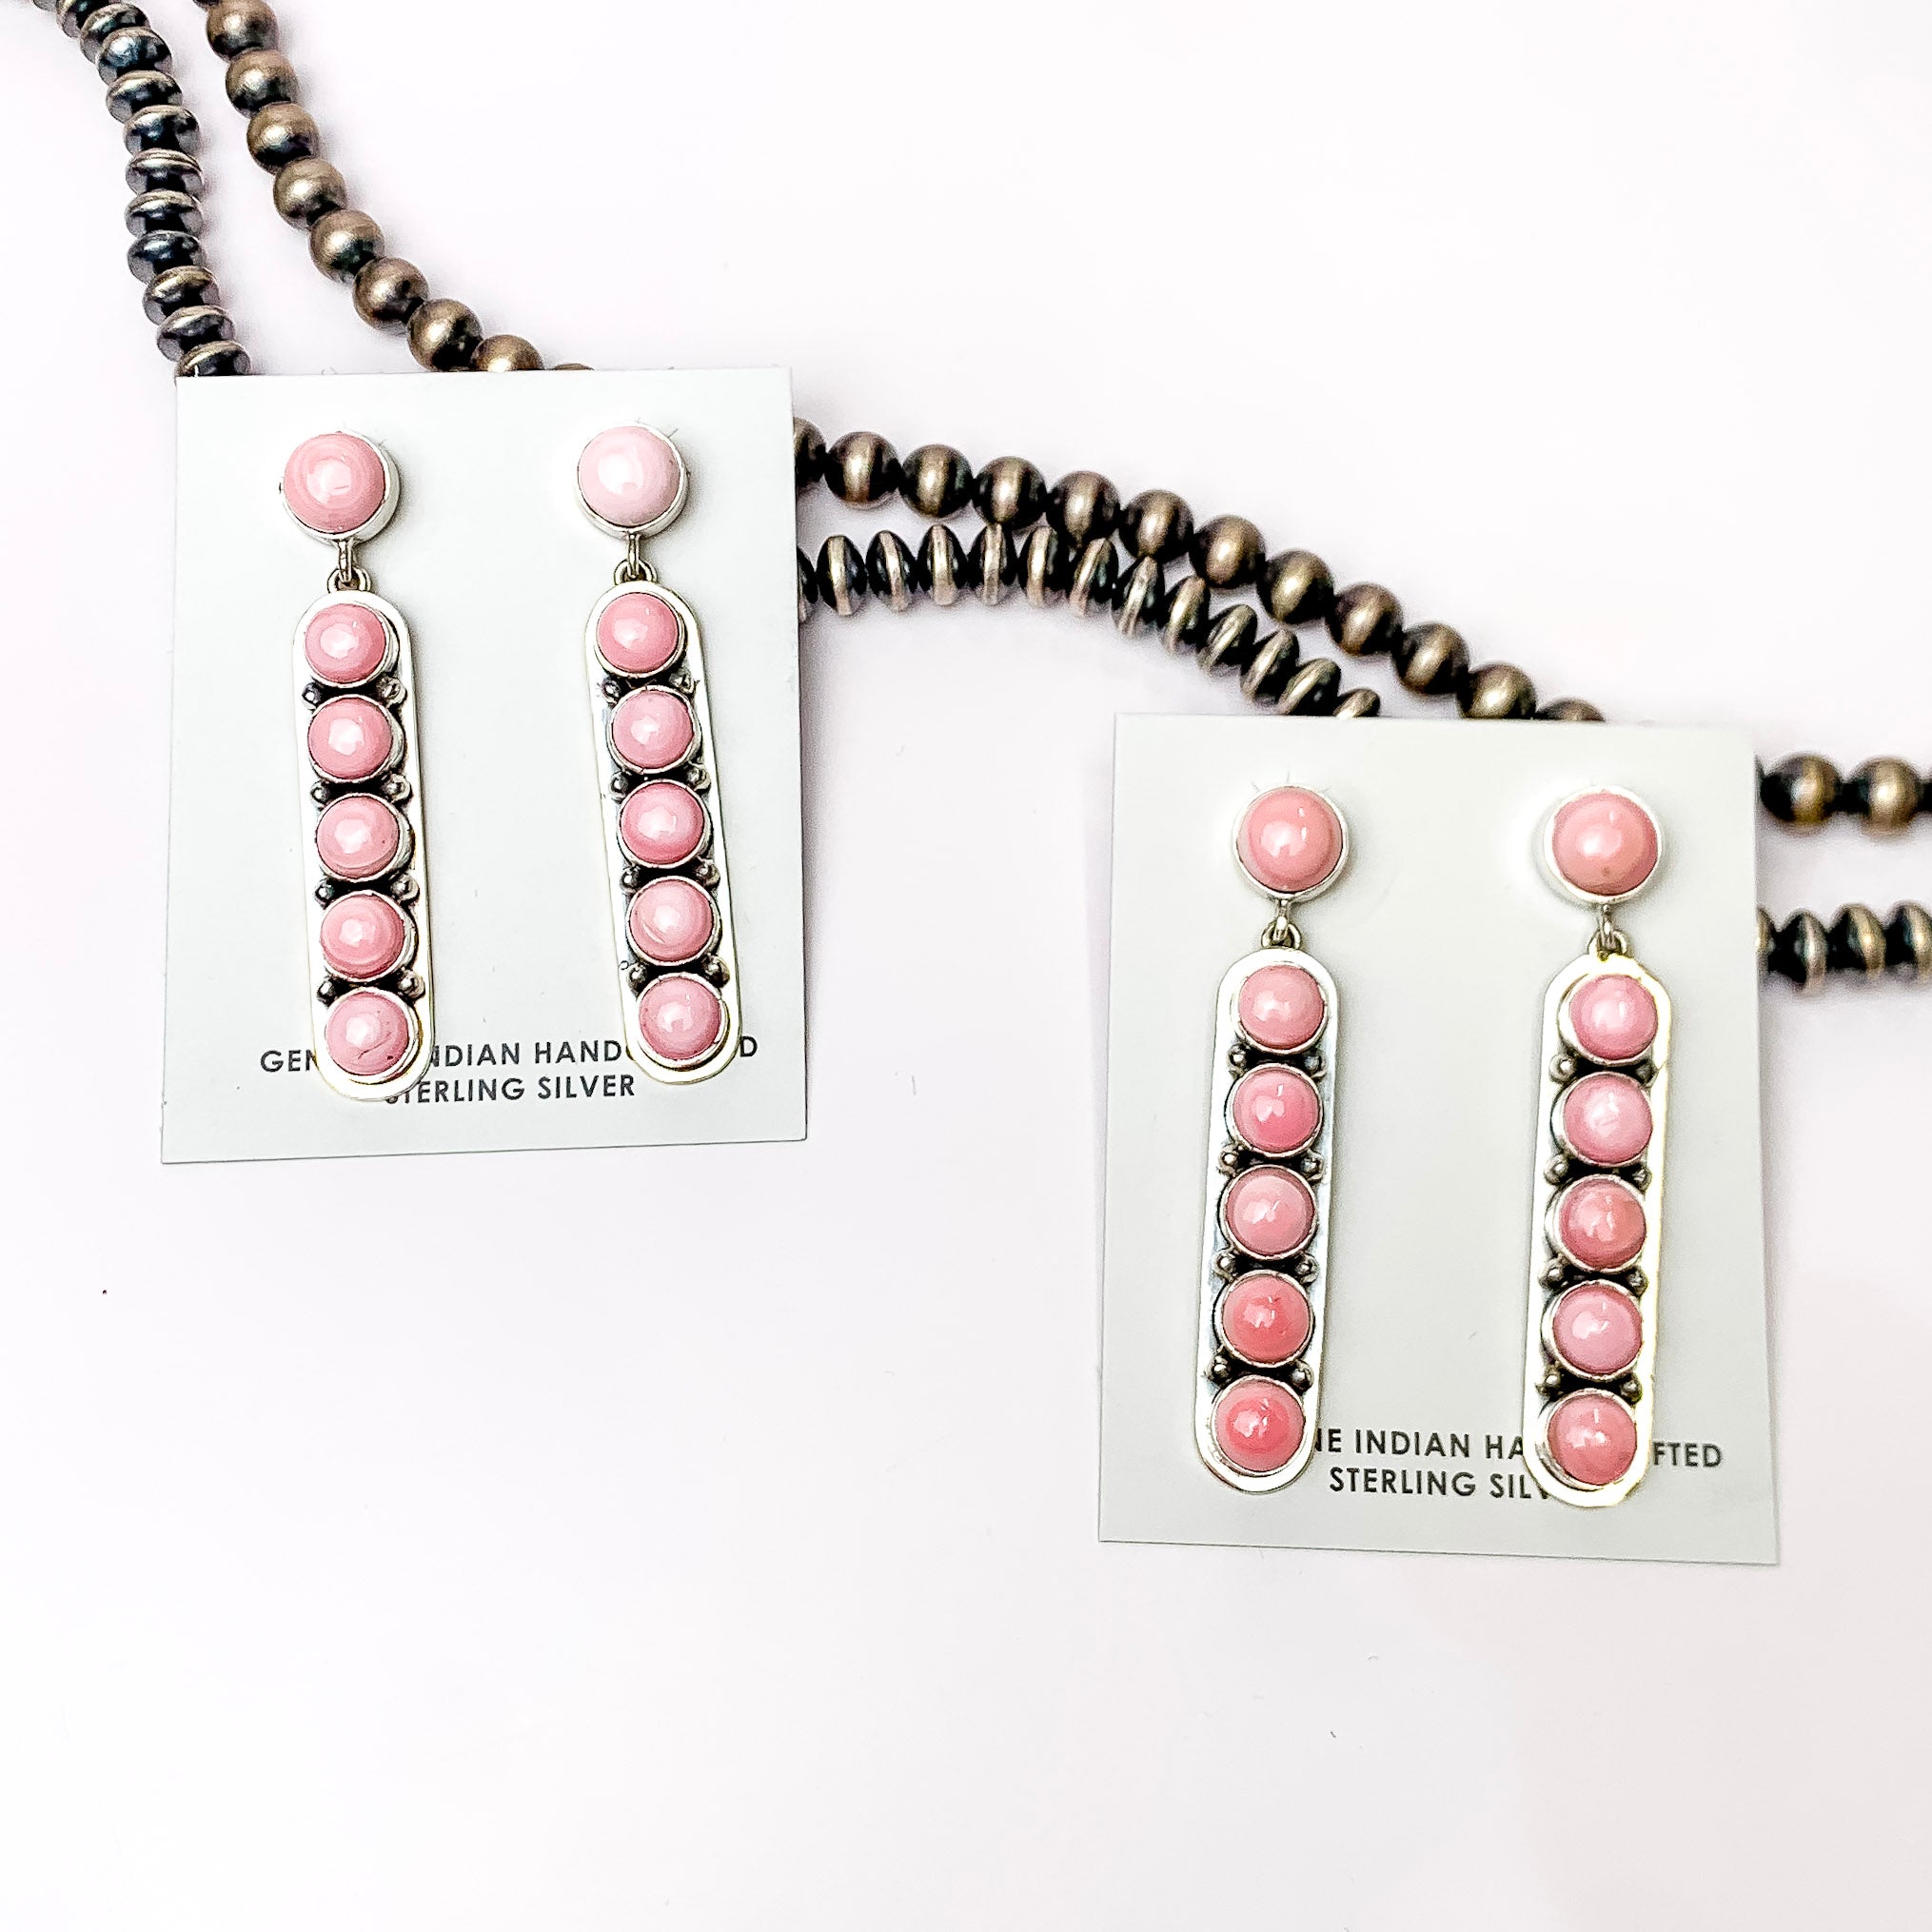 Centered in the picture are two sets of pink concho post back earrings. A strand of navajo pearls are laid above the earrings, all on a white background. 